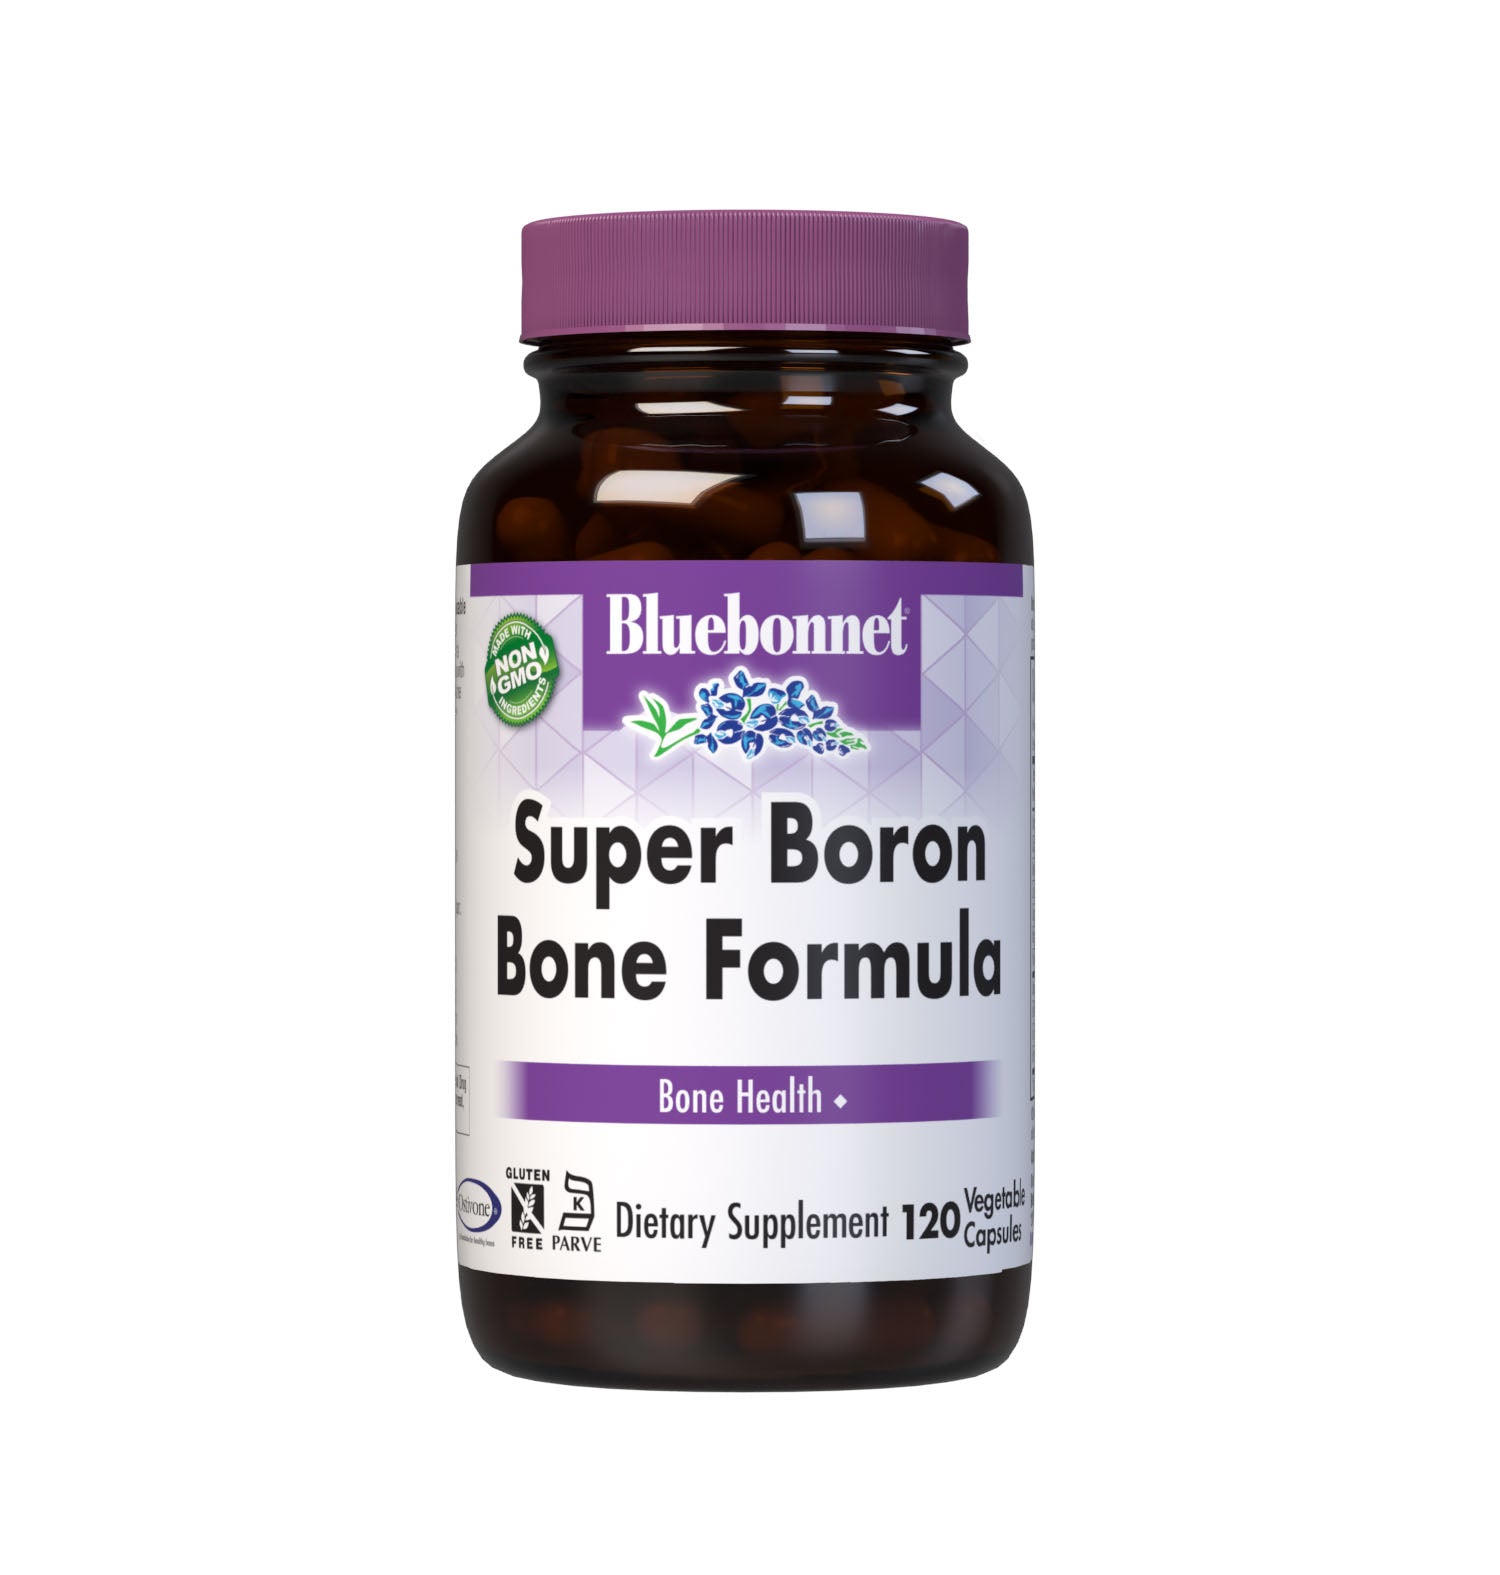 Bluebonnet’s Super Boron Bone Formula 120 Vegetable Capsules are formulated with a special blend of calcium, magnesium, potassium, zinc, vitamin D3 and the trace minerals copper. Also formulated with at supplies the soy isoflavones Genistein, Genistein, Daidzein, Daidzin, Glycitein and Glycitin. #size_120 count